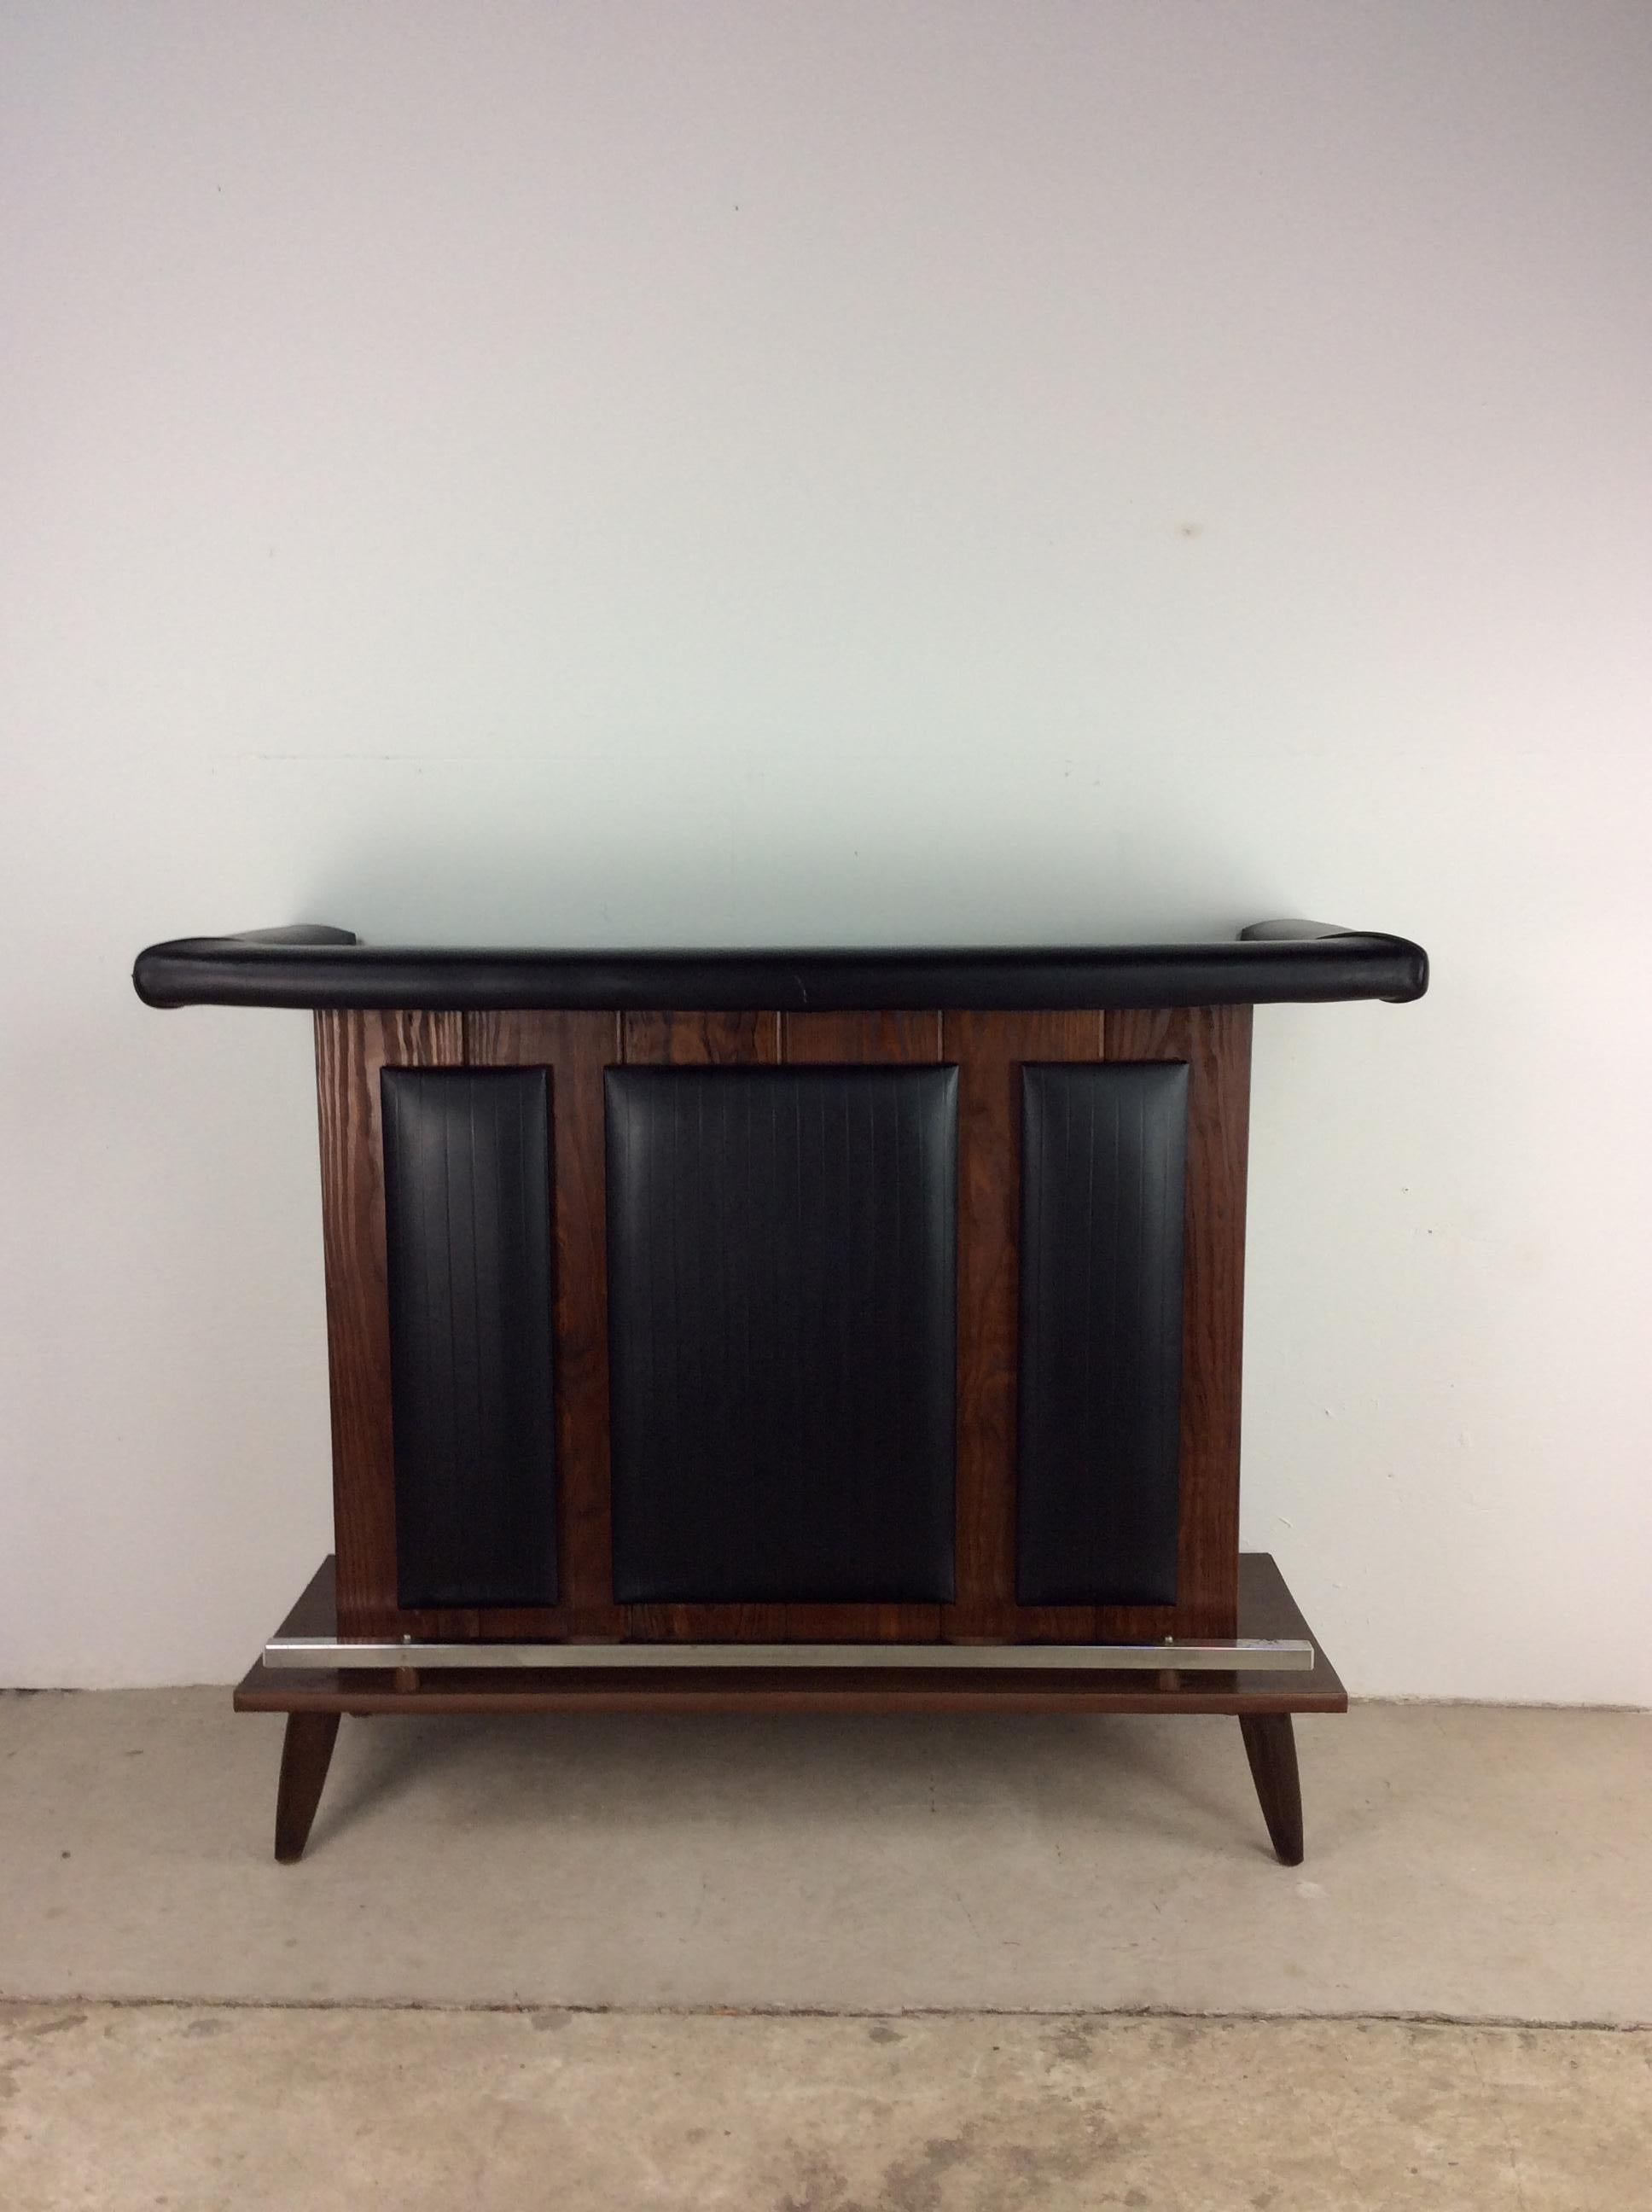 This Mid-Century Modern dry bar features hardwood construction, original walnut finish, black vinyl counter edge with black vinyl accents on the bar front, tapered legs, open shelving in the back and a chrome kick rail.

Dimensions: 51.5w 19d